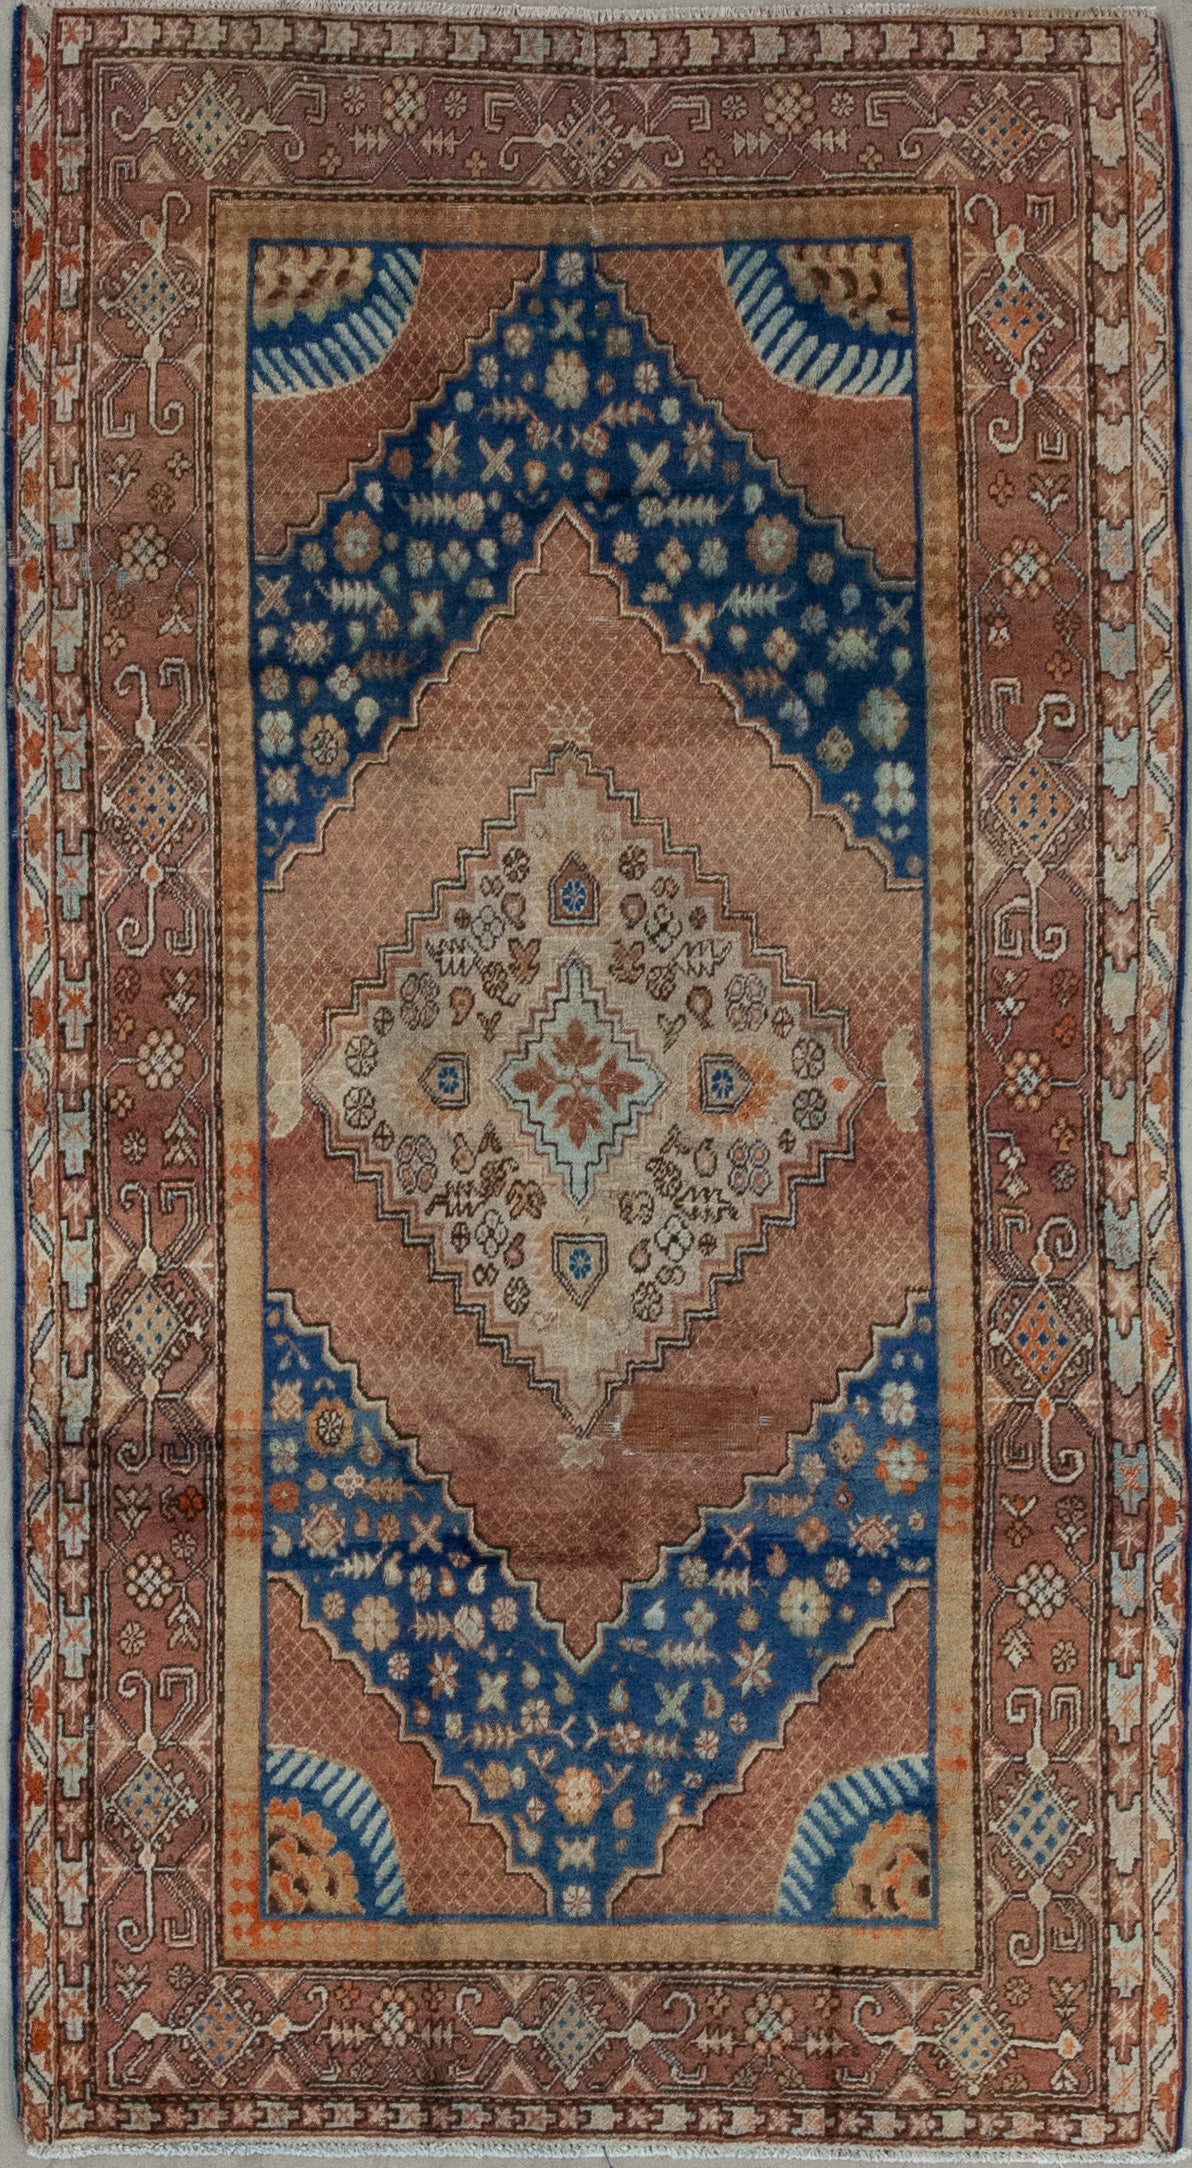 Buddhist's awe-inspiring rug comes with a delightful color scheme that has variations of earth brown and sky blue. The traditional design features a large blue diamond which is nesting three more rhombuses.